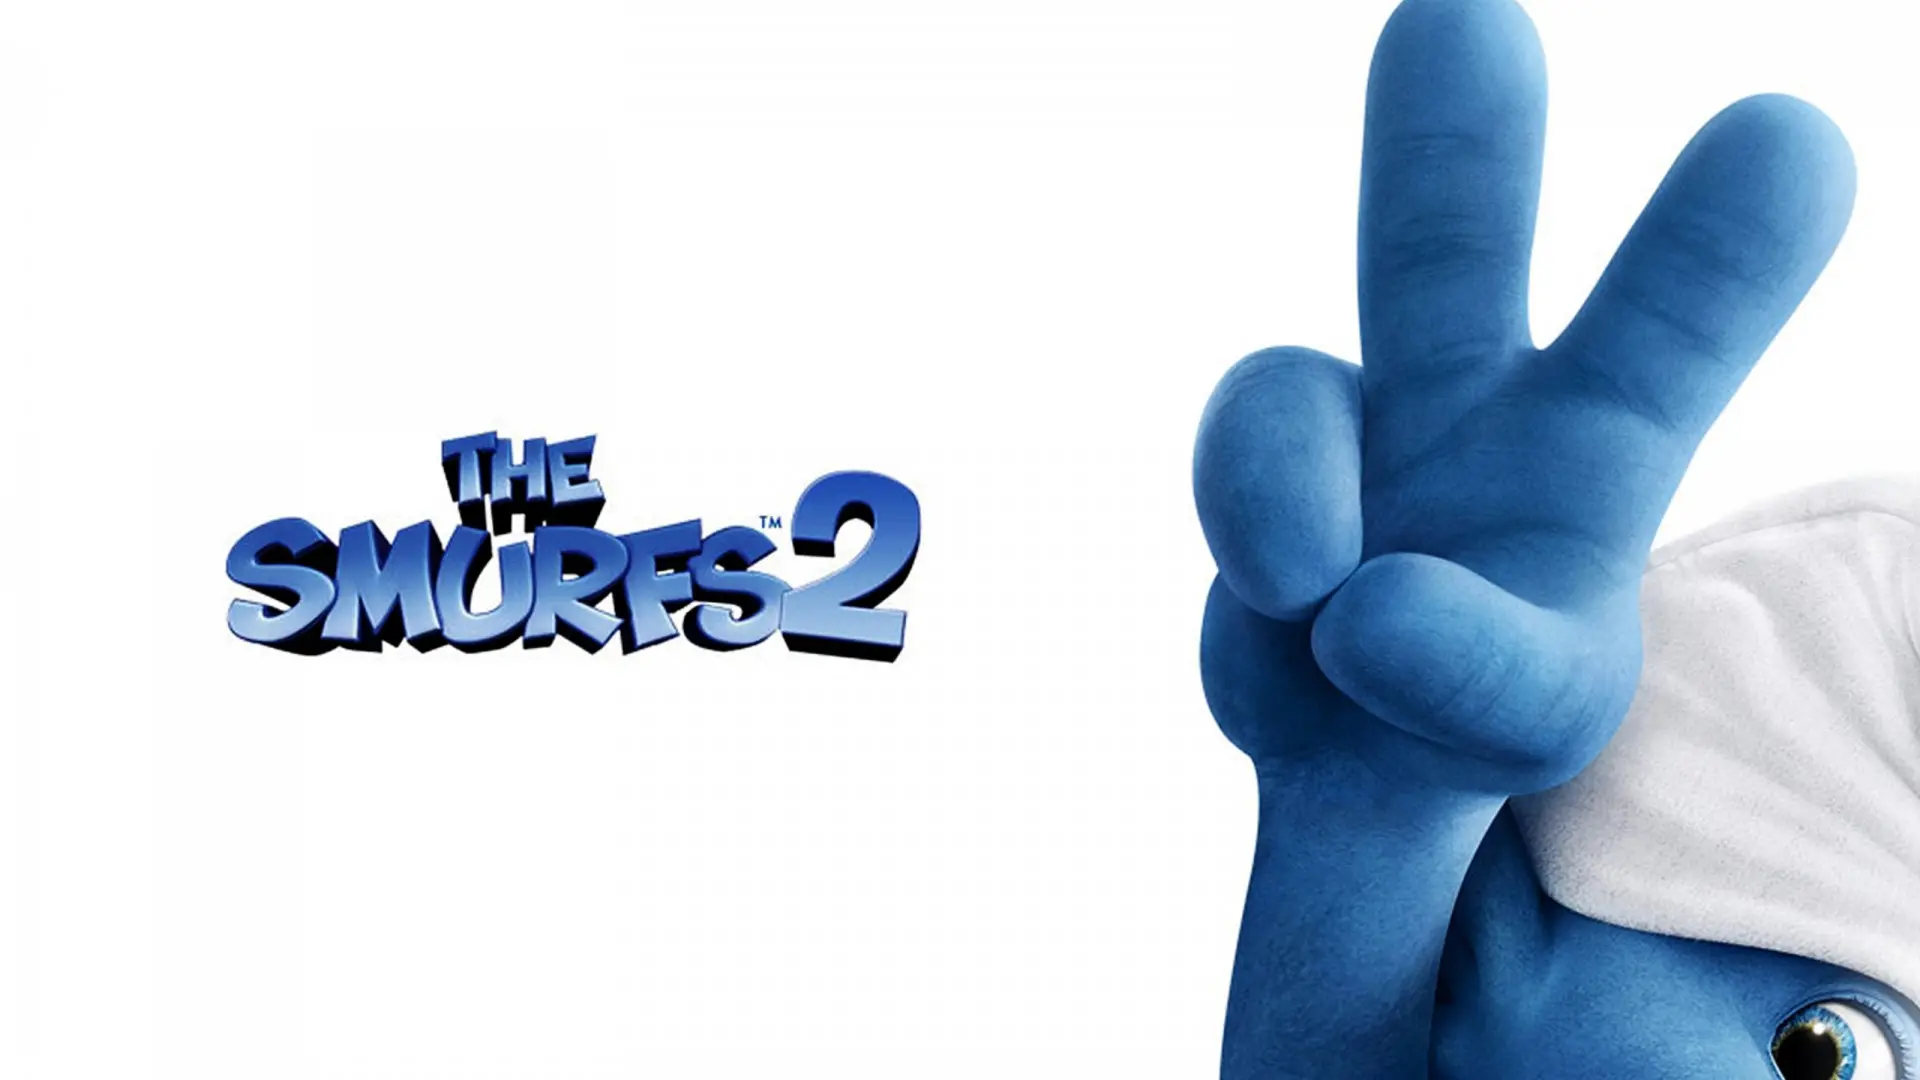 Movie The Smurfs 2 wallpaper 4 | Background Image